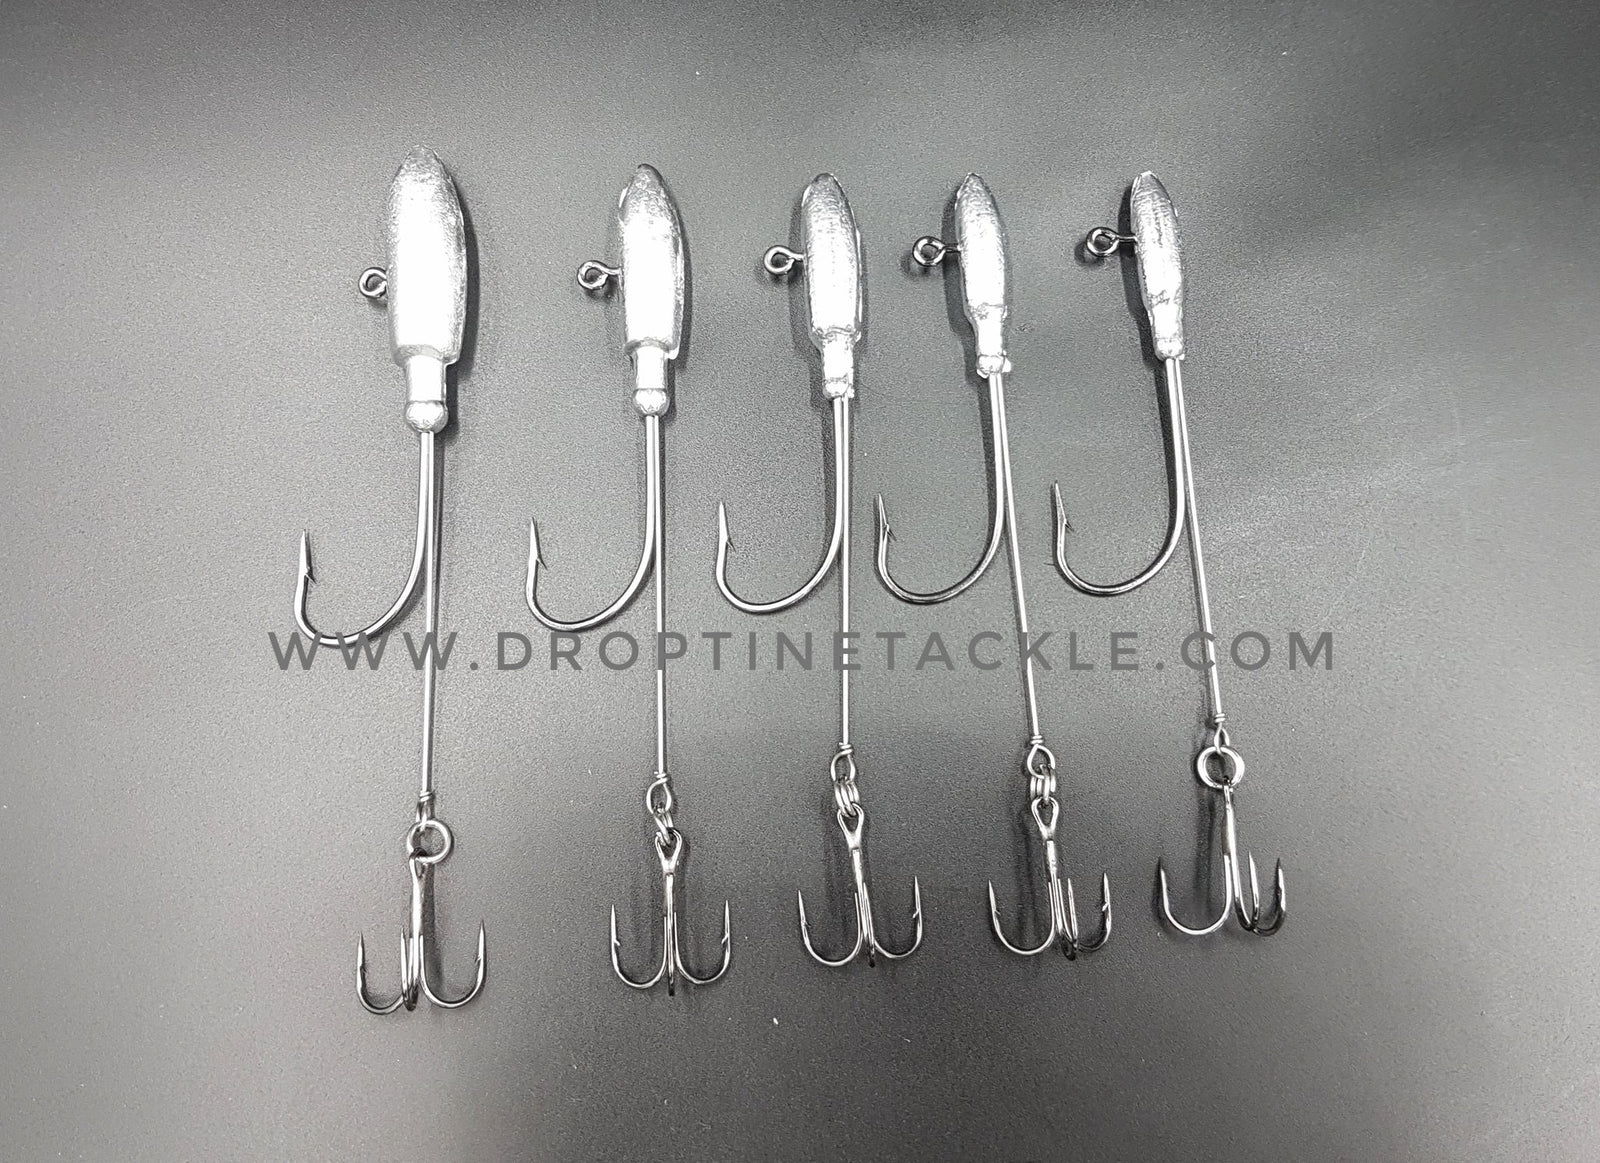 NEW INSIDER 1/16 OZ CRAPPIE TUBE JIG HEADS with sz 4 EAGLE CLAW